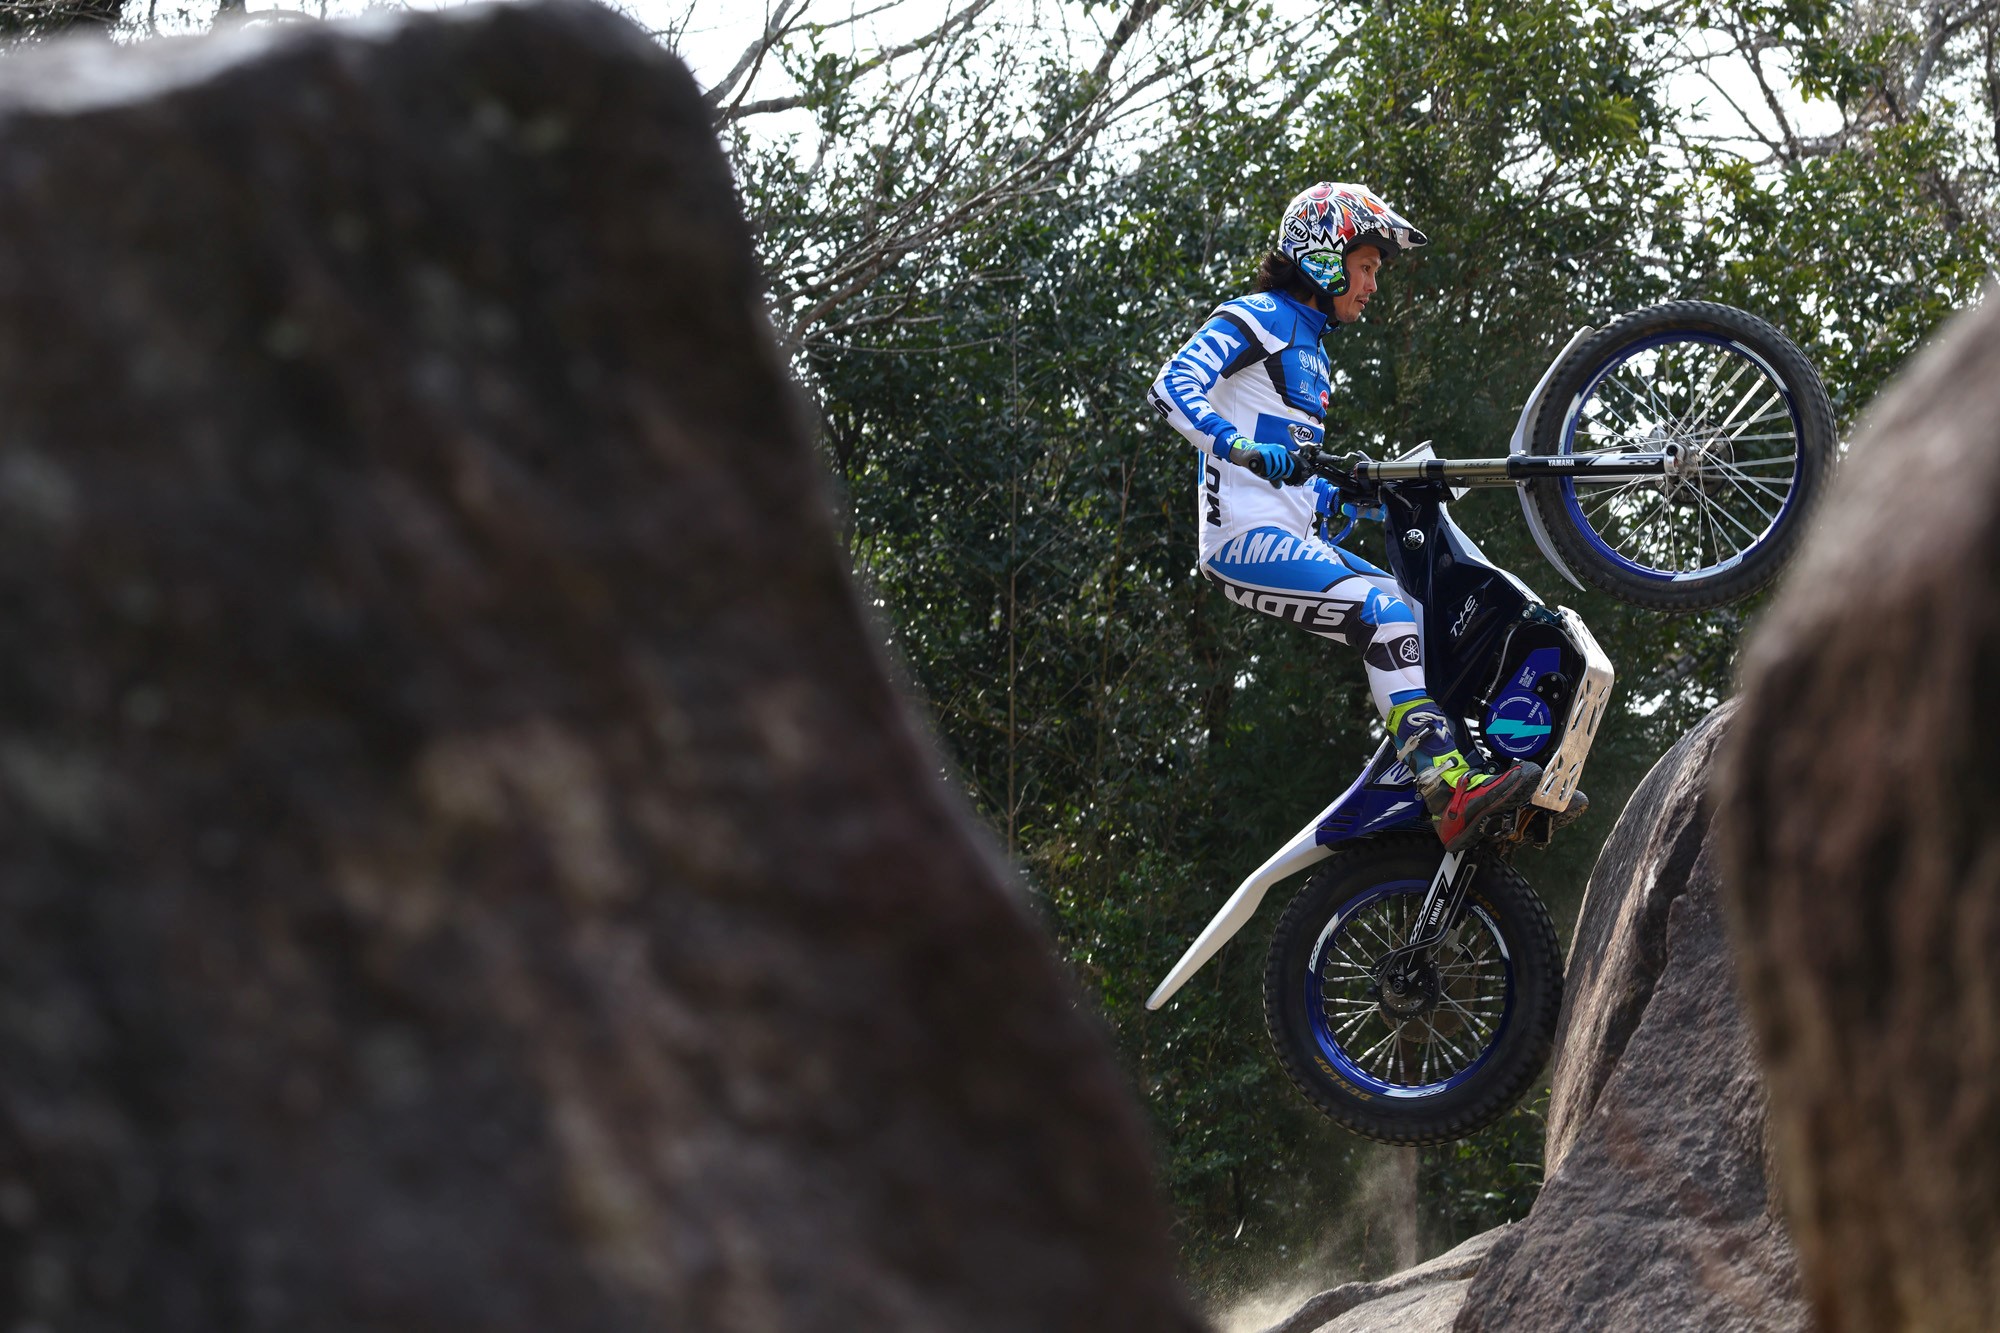 Kuroyama Kenichi, one of Japan's best trials riders, will compete in the Trial World Championship with the TY-E 2.0.